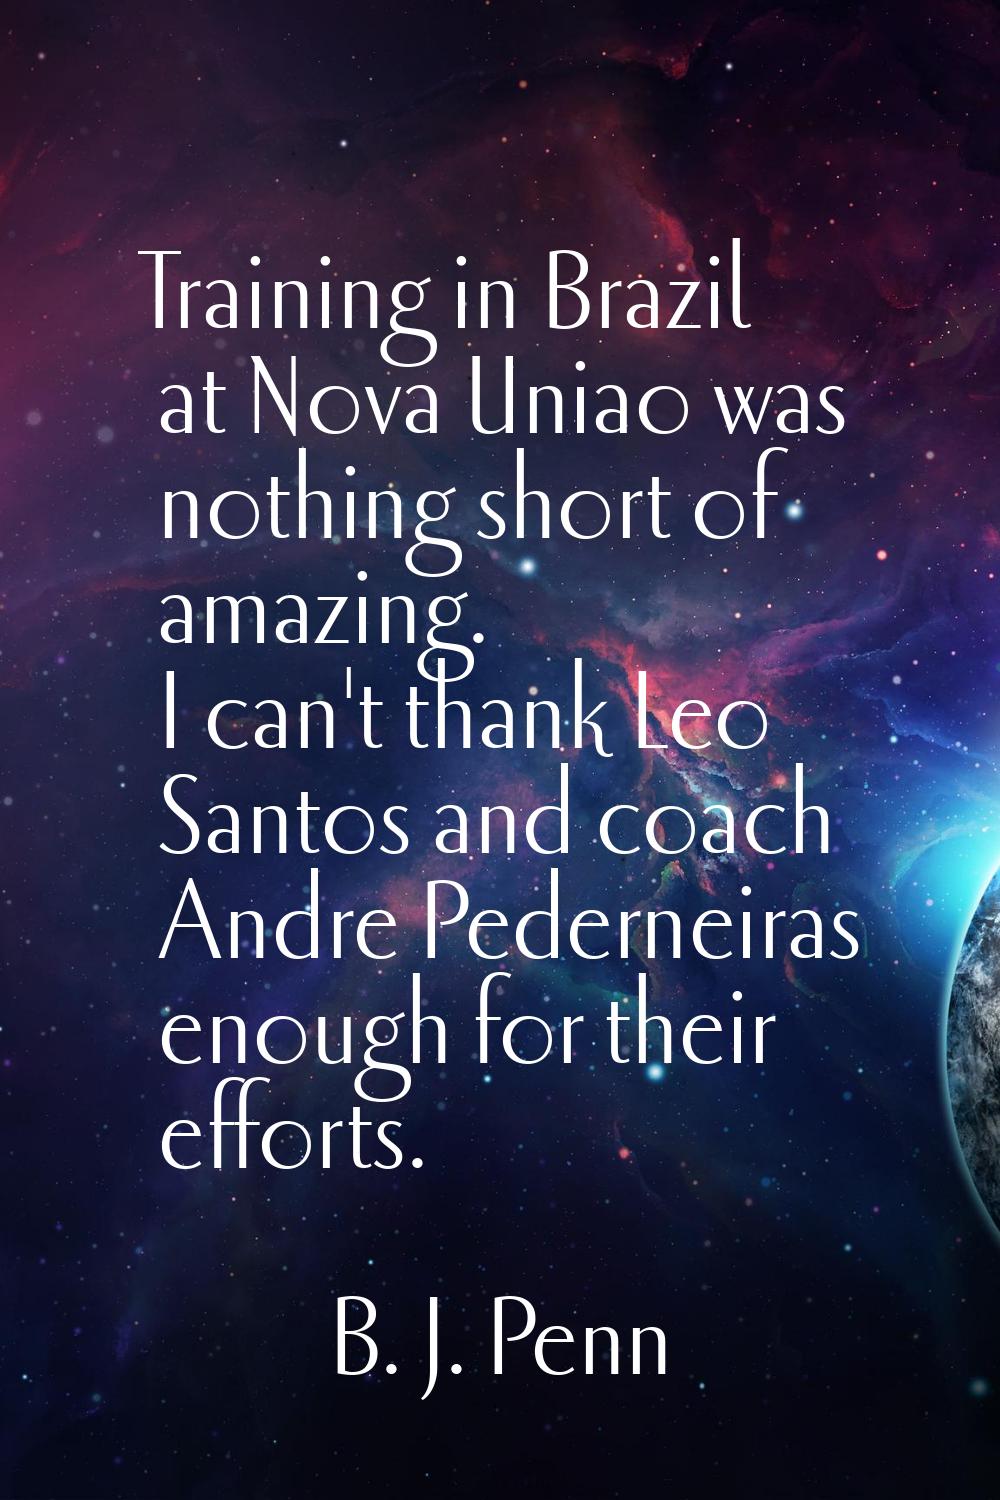 Training in Brazil at Nova Uniao was nothing short of amazing. I can't thank Leo Santos and coach A